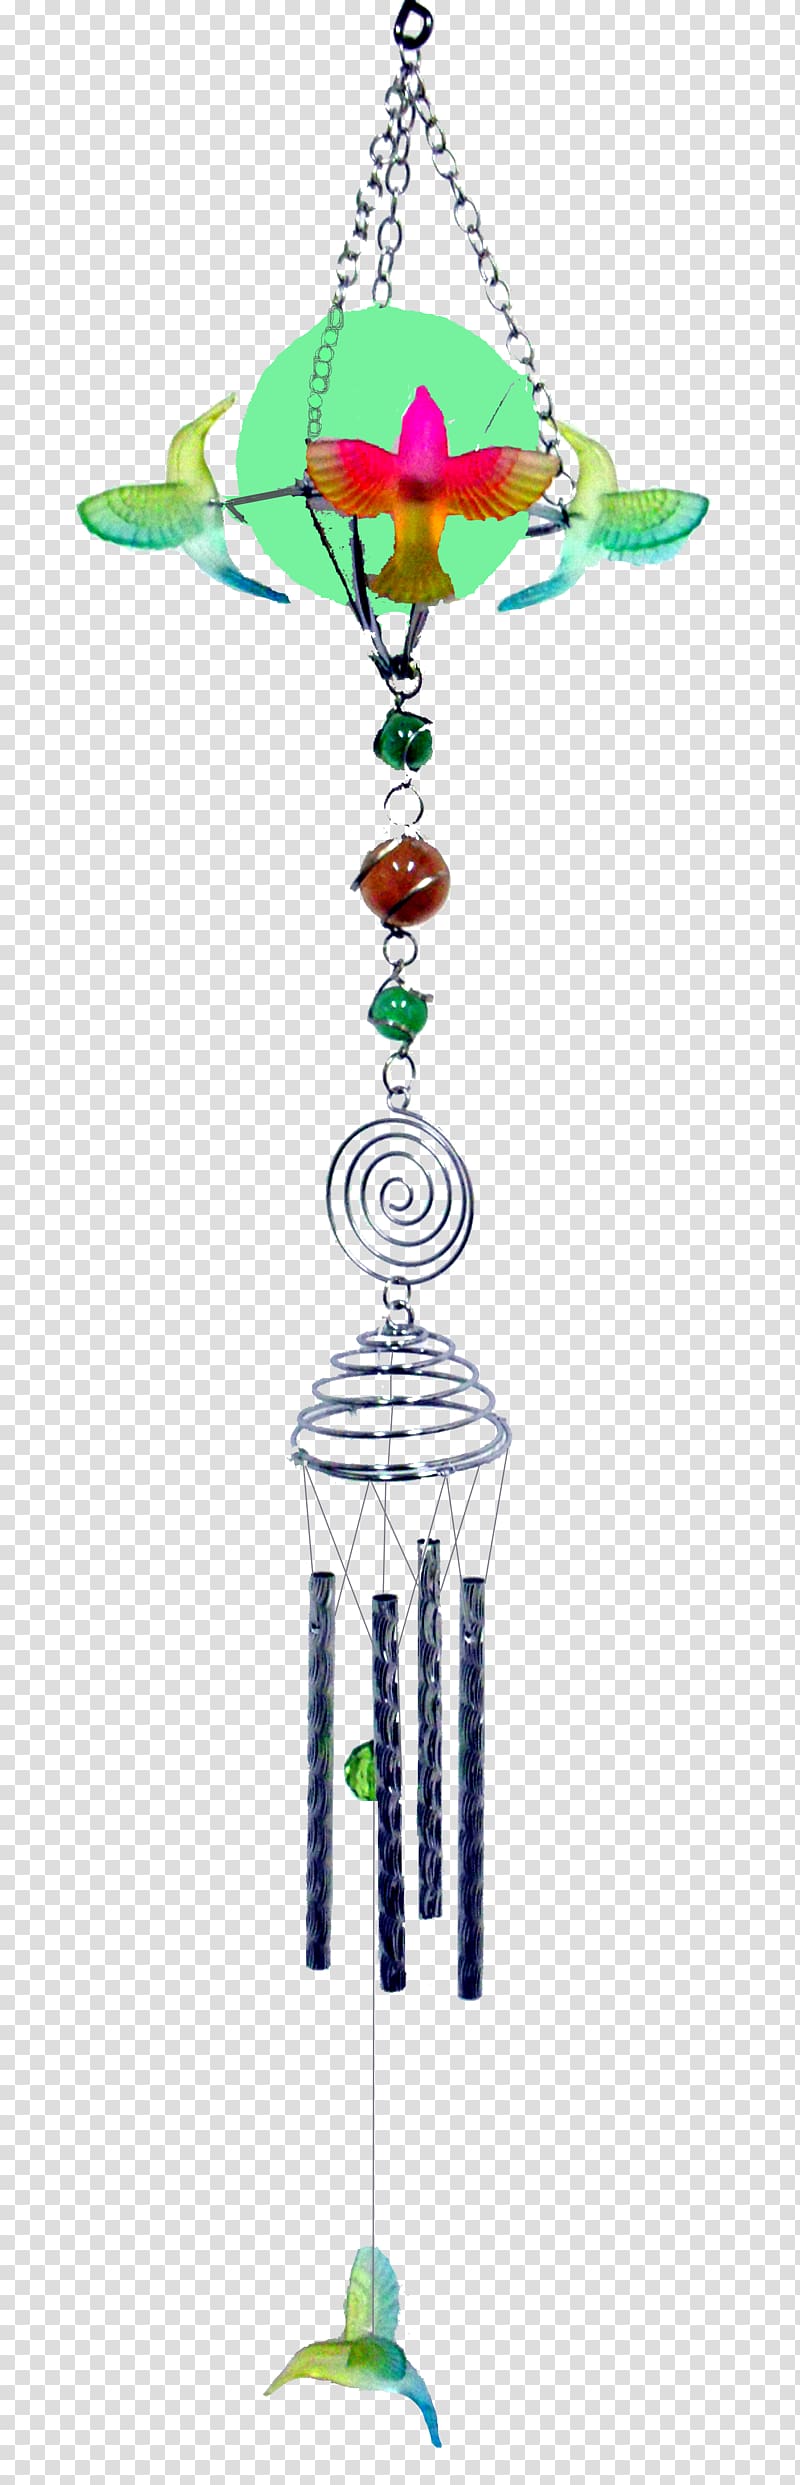 Solar lamp Solar power Light-emitting diode Acrylic paint Light fixture, japanese wind chimes transparent background PNG clipart